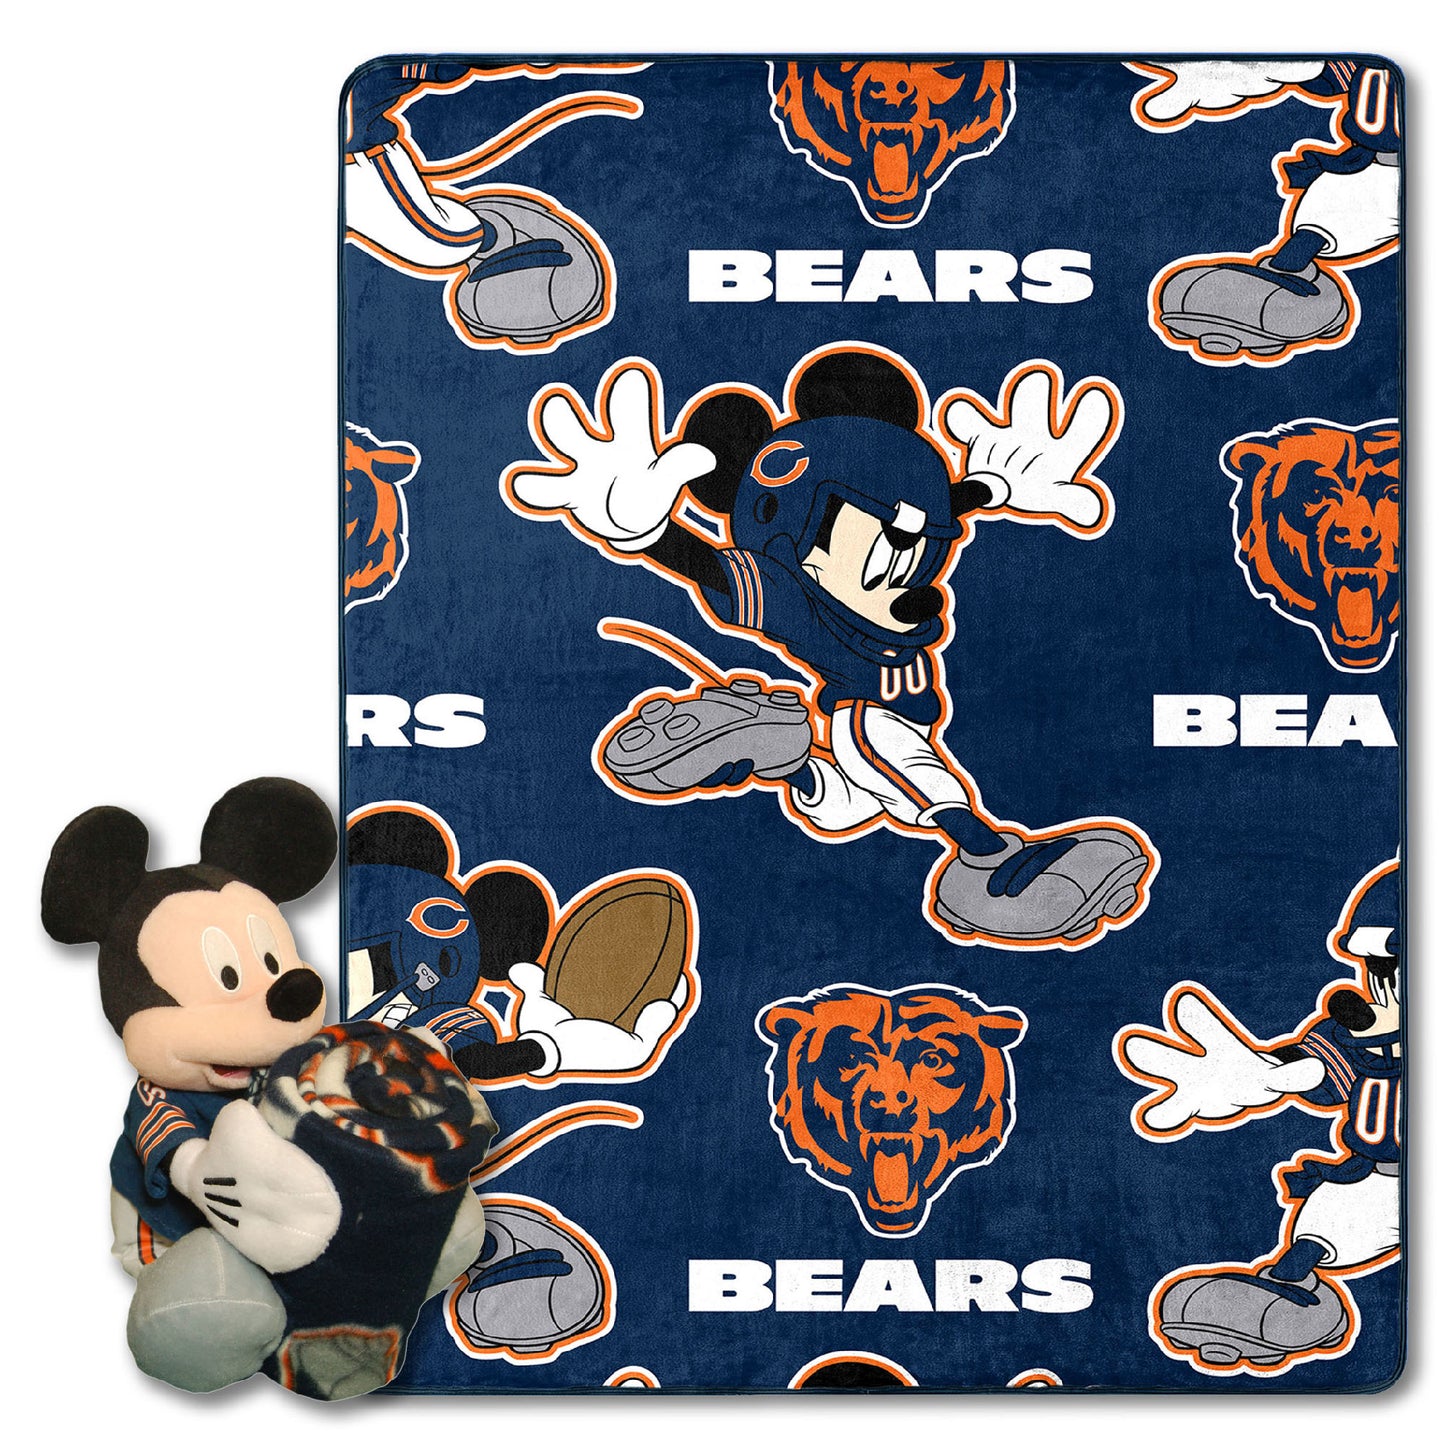 Bears OFFICIAL NFL & Disney's Mickey Mouse Character Hugger Pillow & Silk Touch Throw Set;  40" x 50"